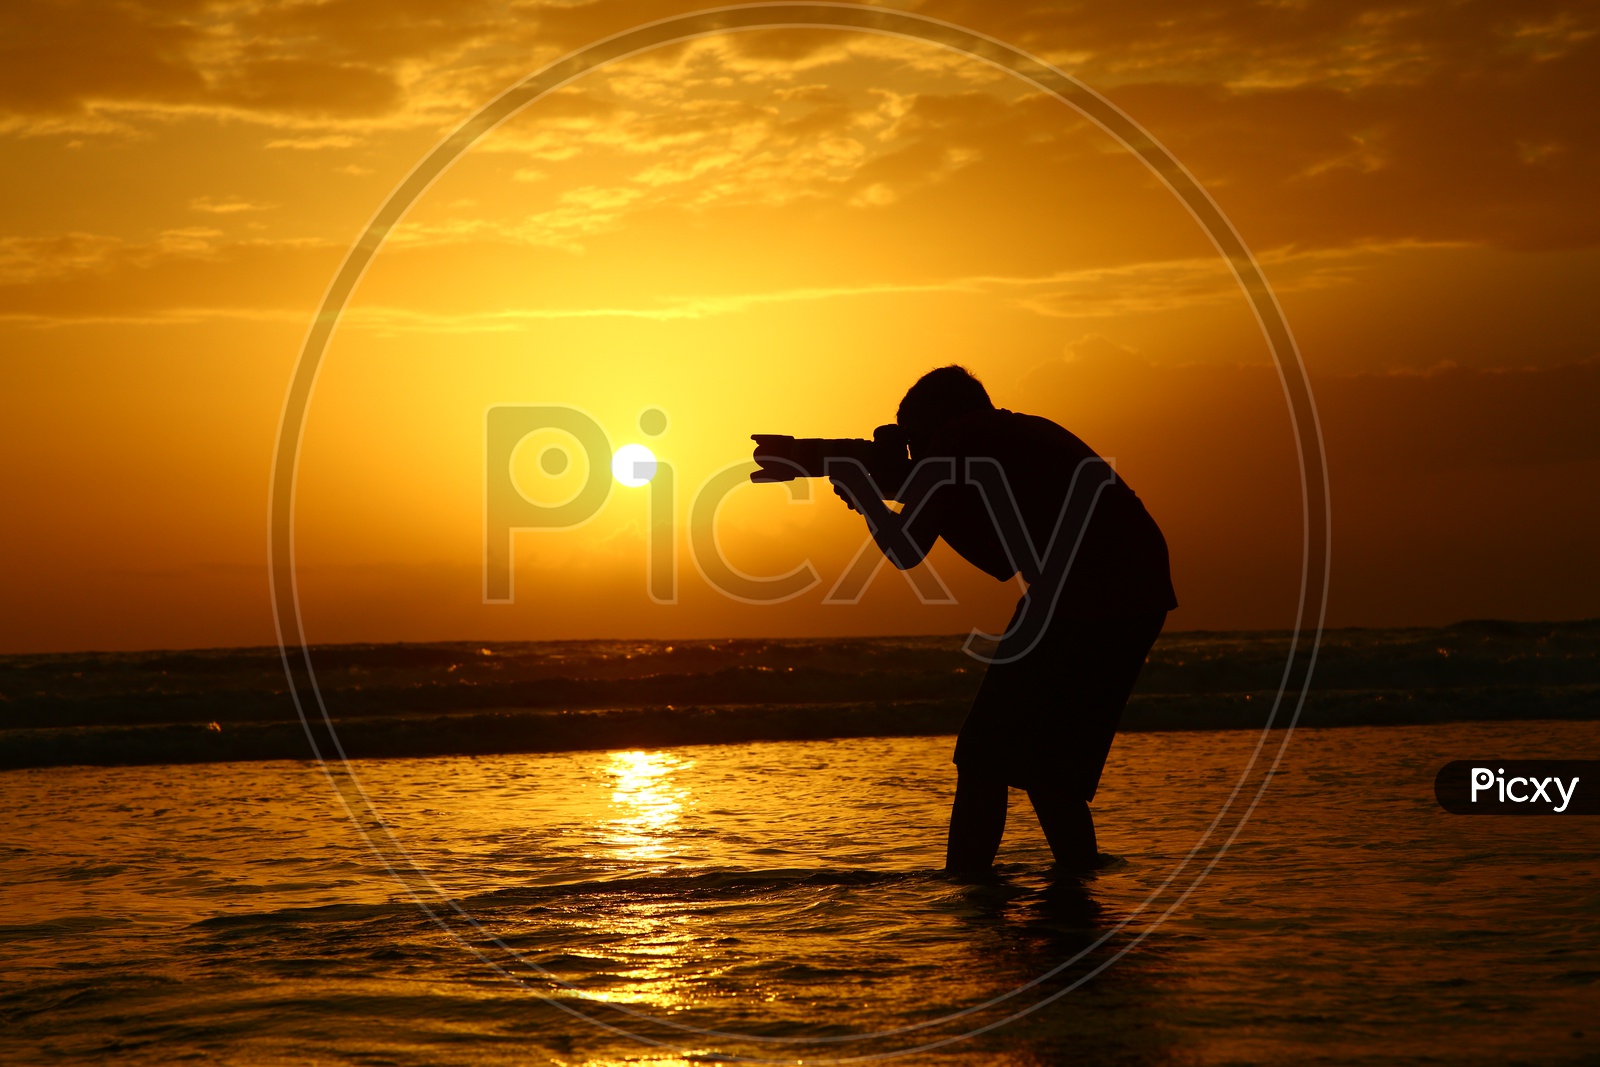 Silhouette of a Photographer Over a Sunset Sky At a Beach in Goa